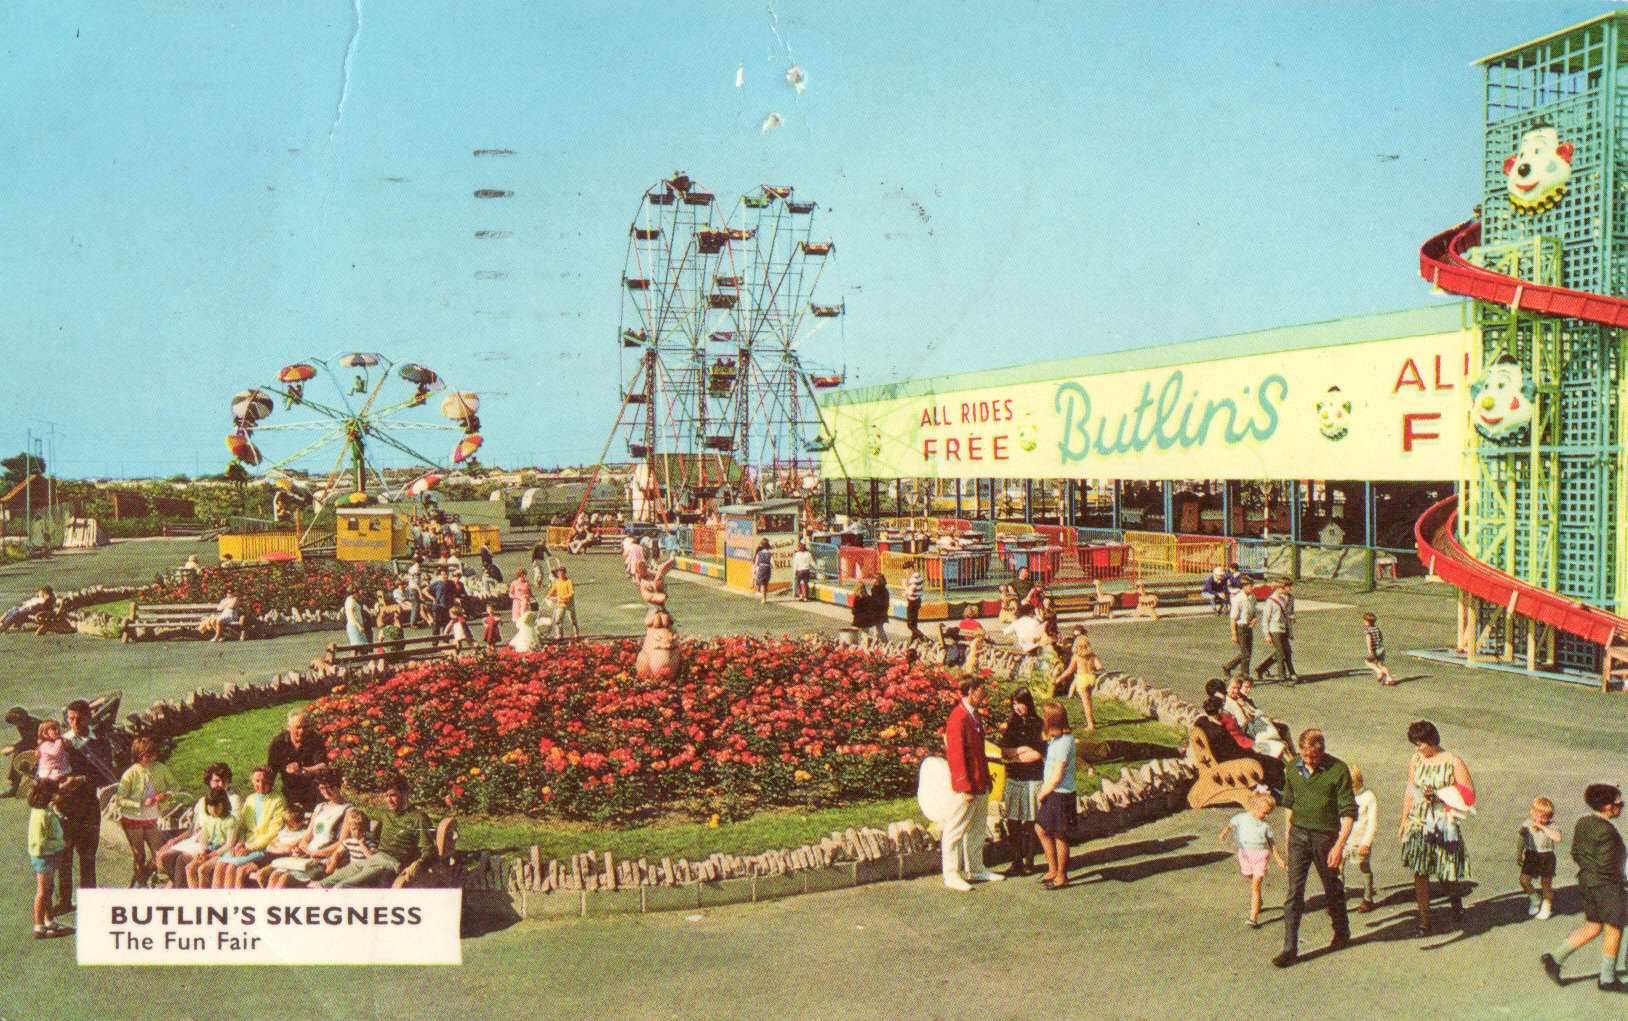 Butlins Skegness Chairlift and Funfair at Redcoats Reunited